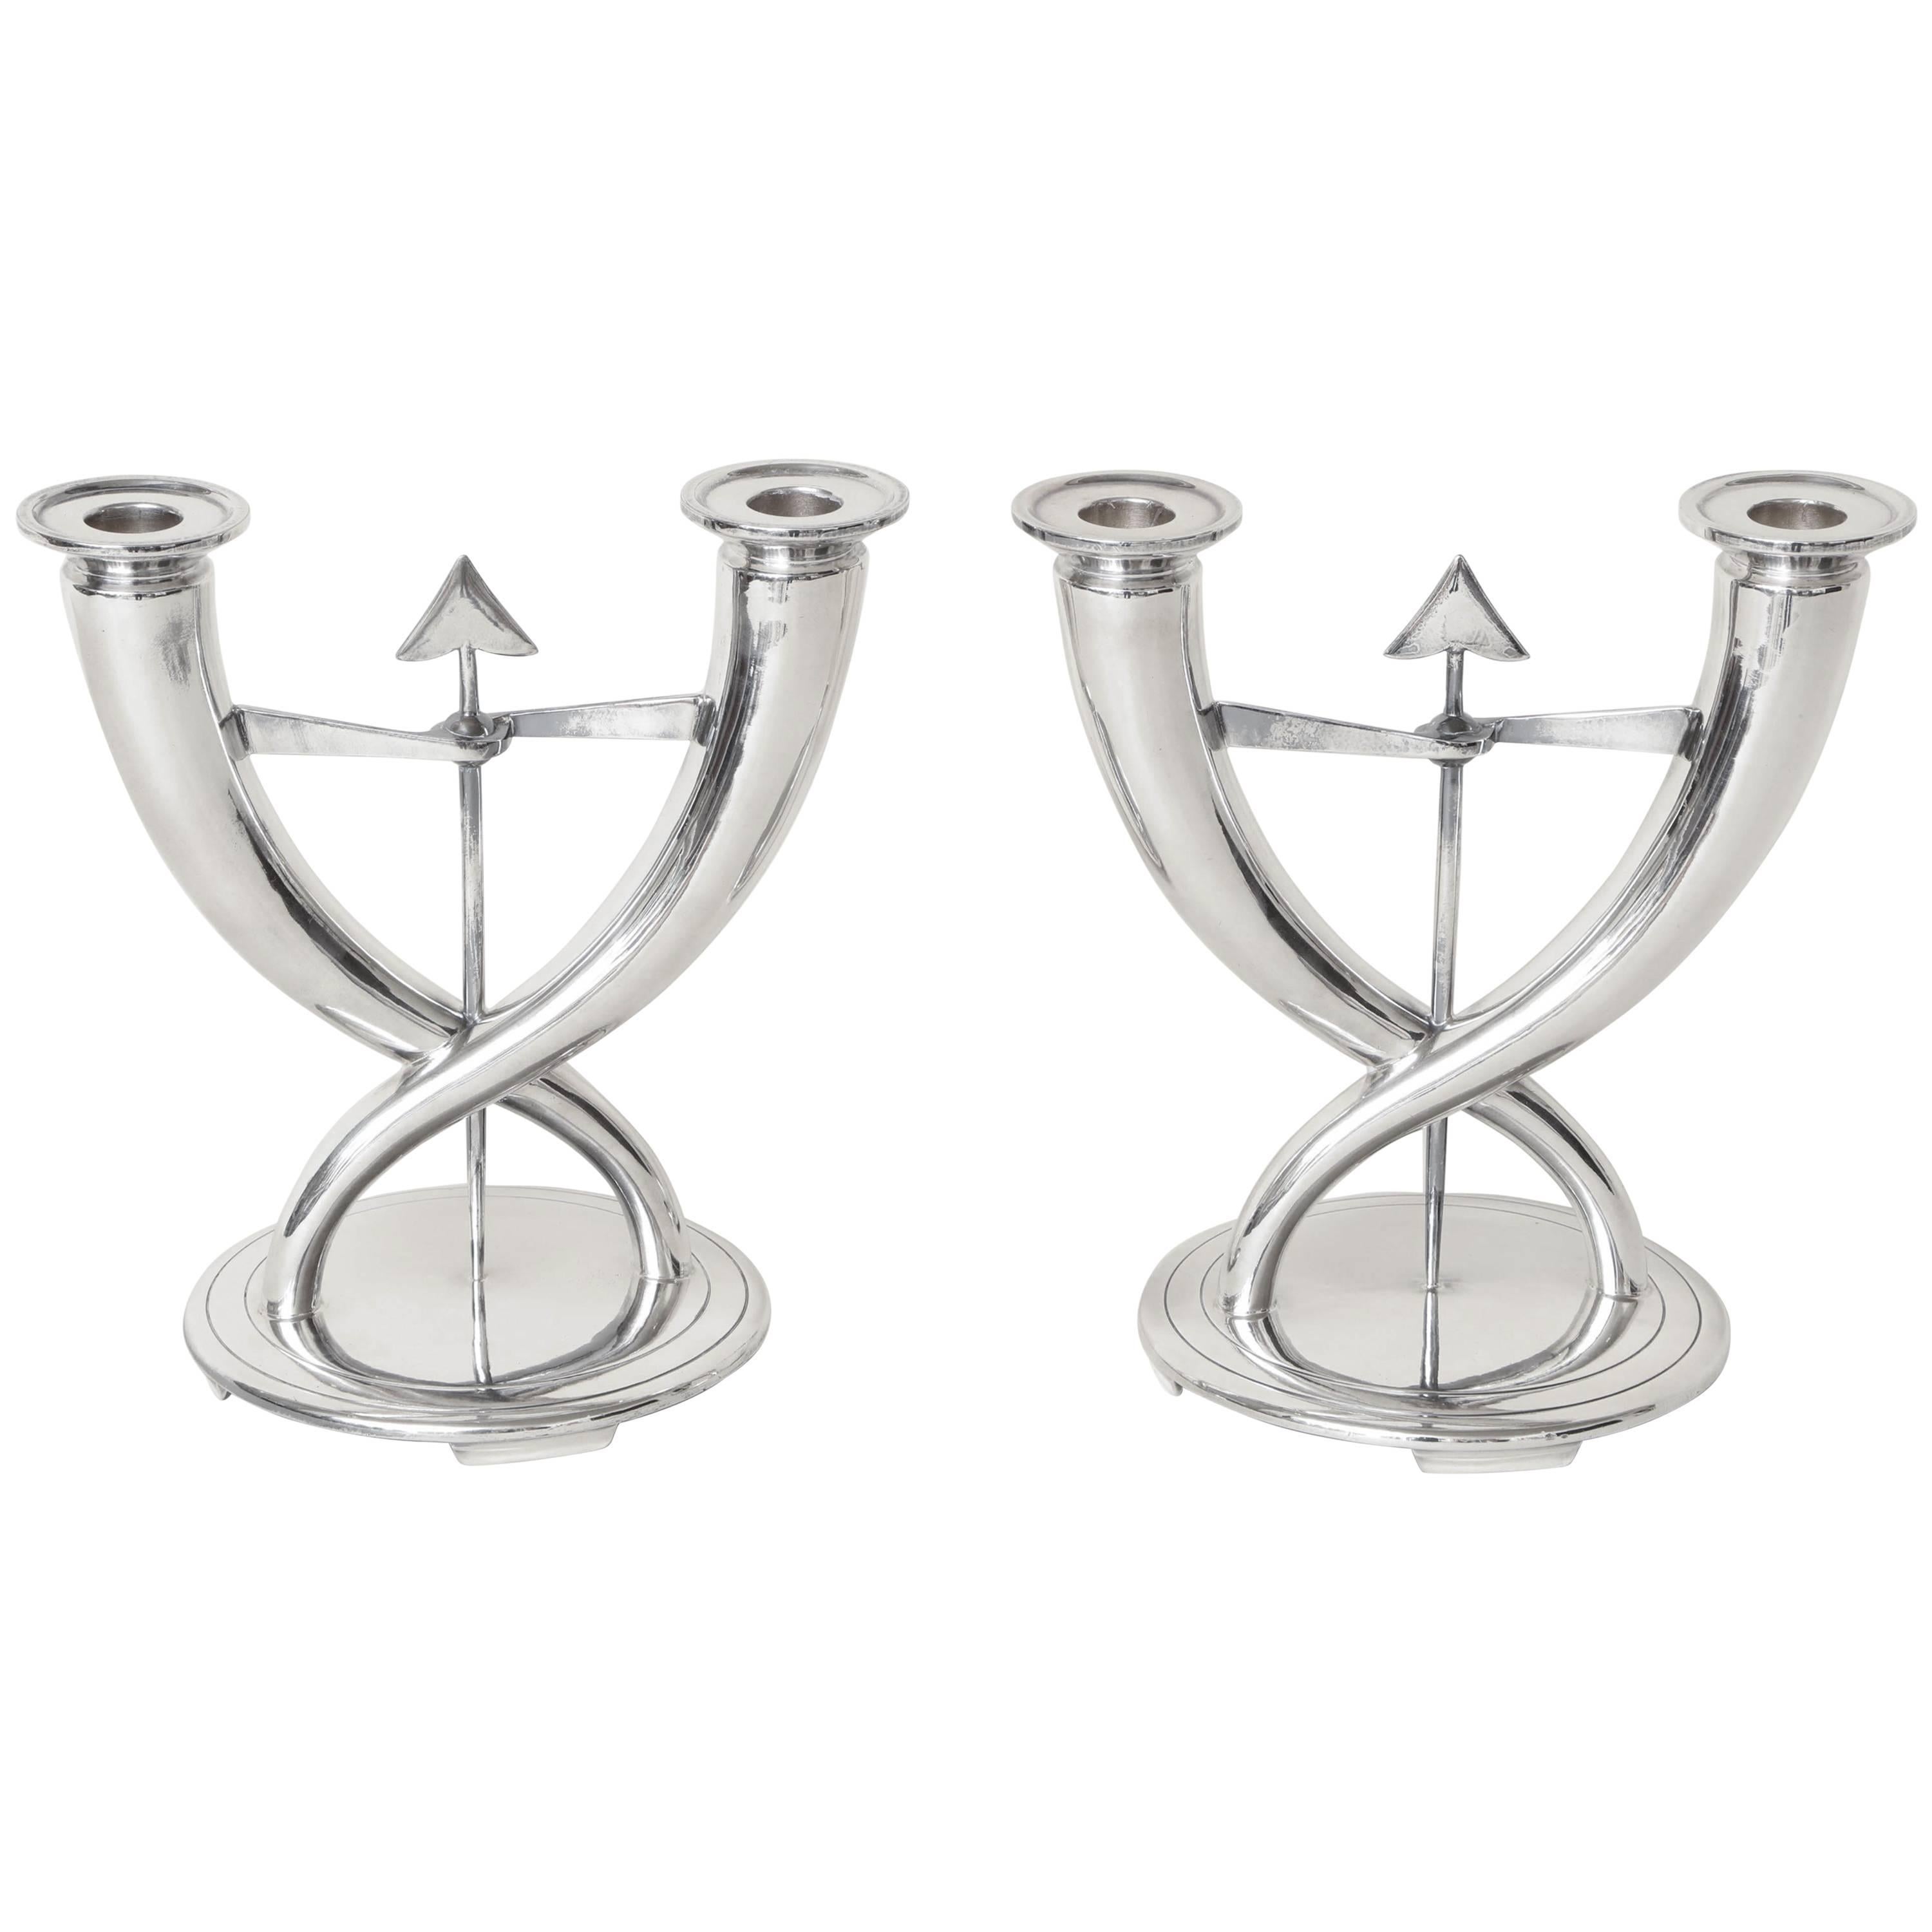 Gio Ponti for Christofle Pair of Italian Art Deco Silver Plated Candelabra